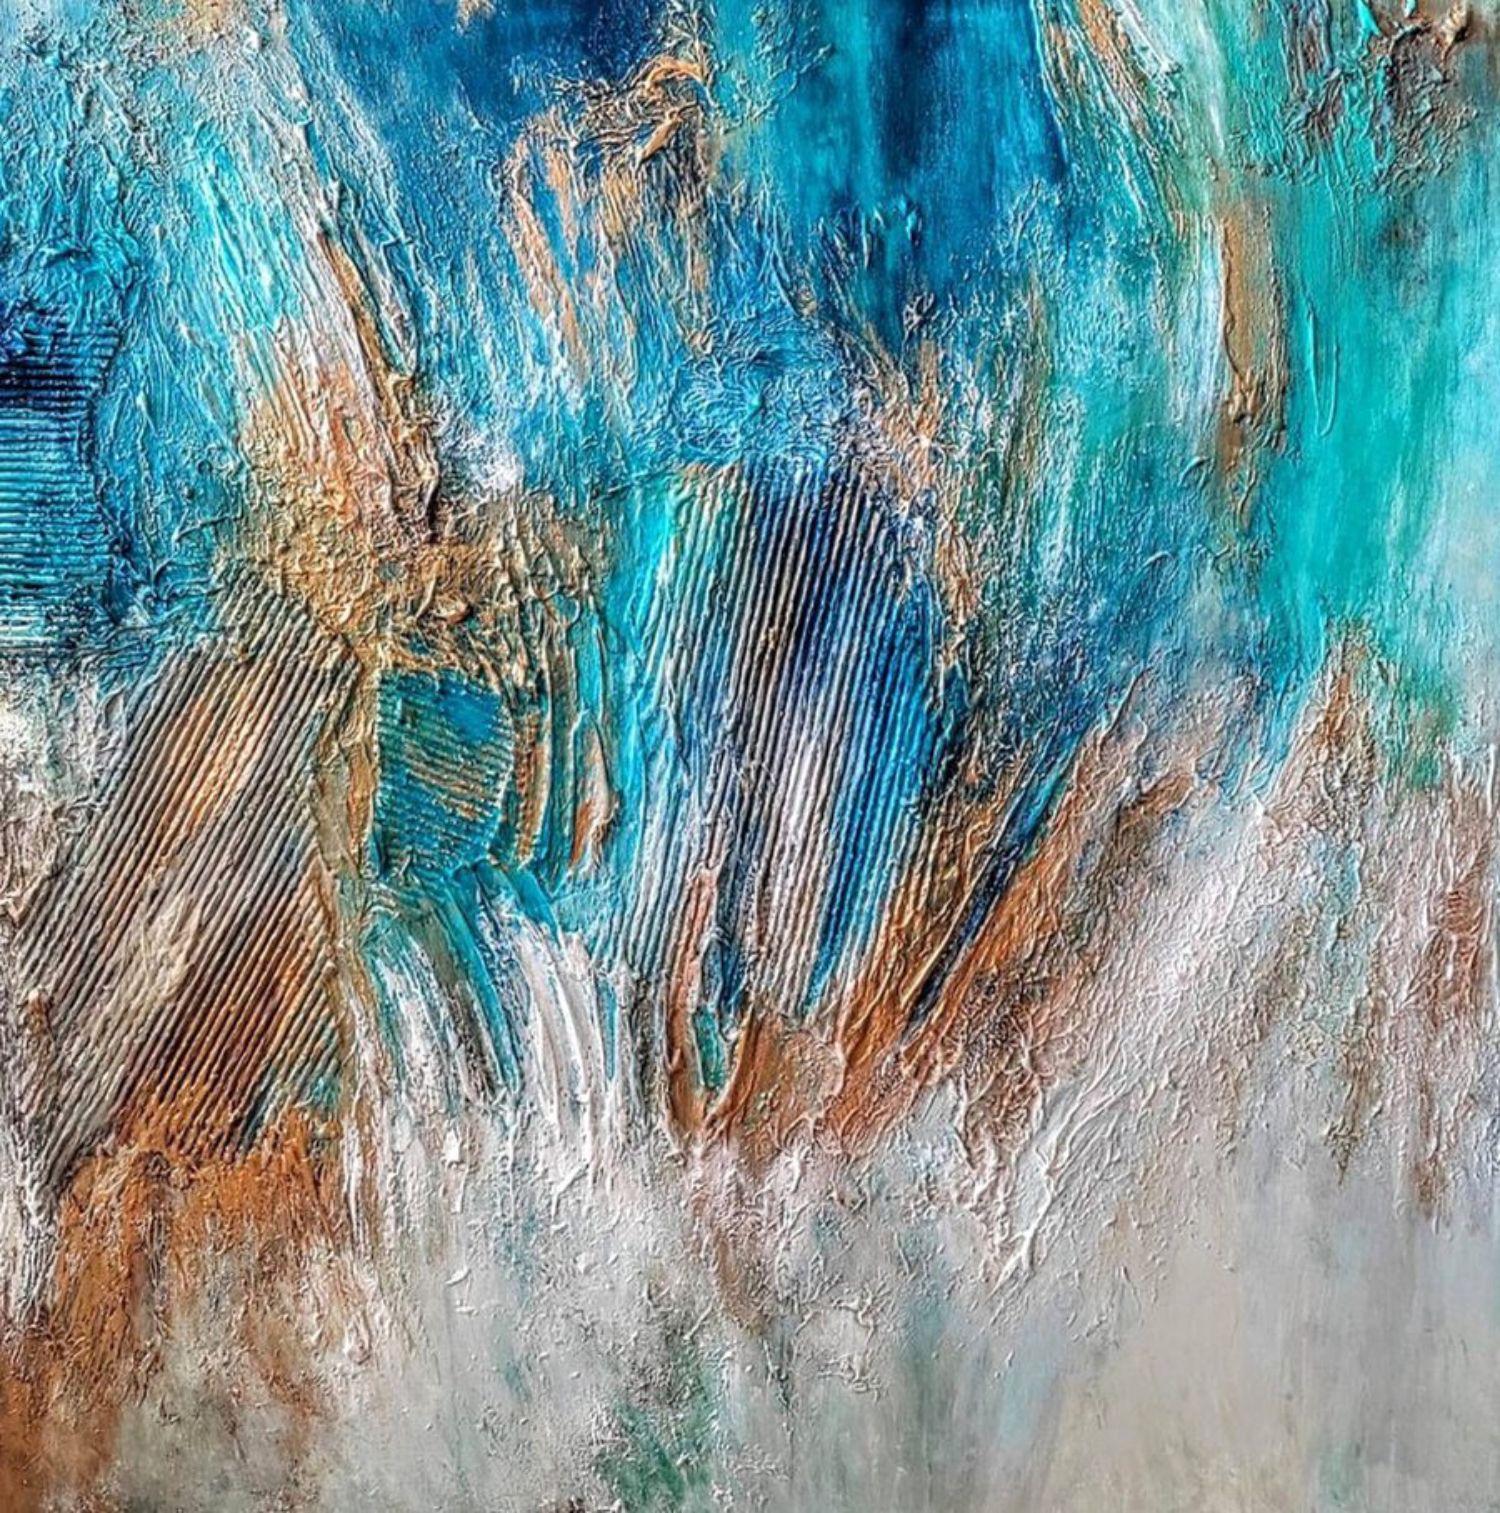 Shades of blue, Mixed Media on Canvas - Mixed Media Art by Alexandra Petropoulou